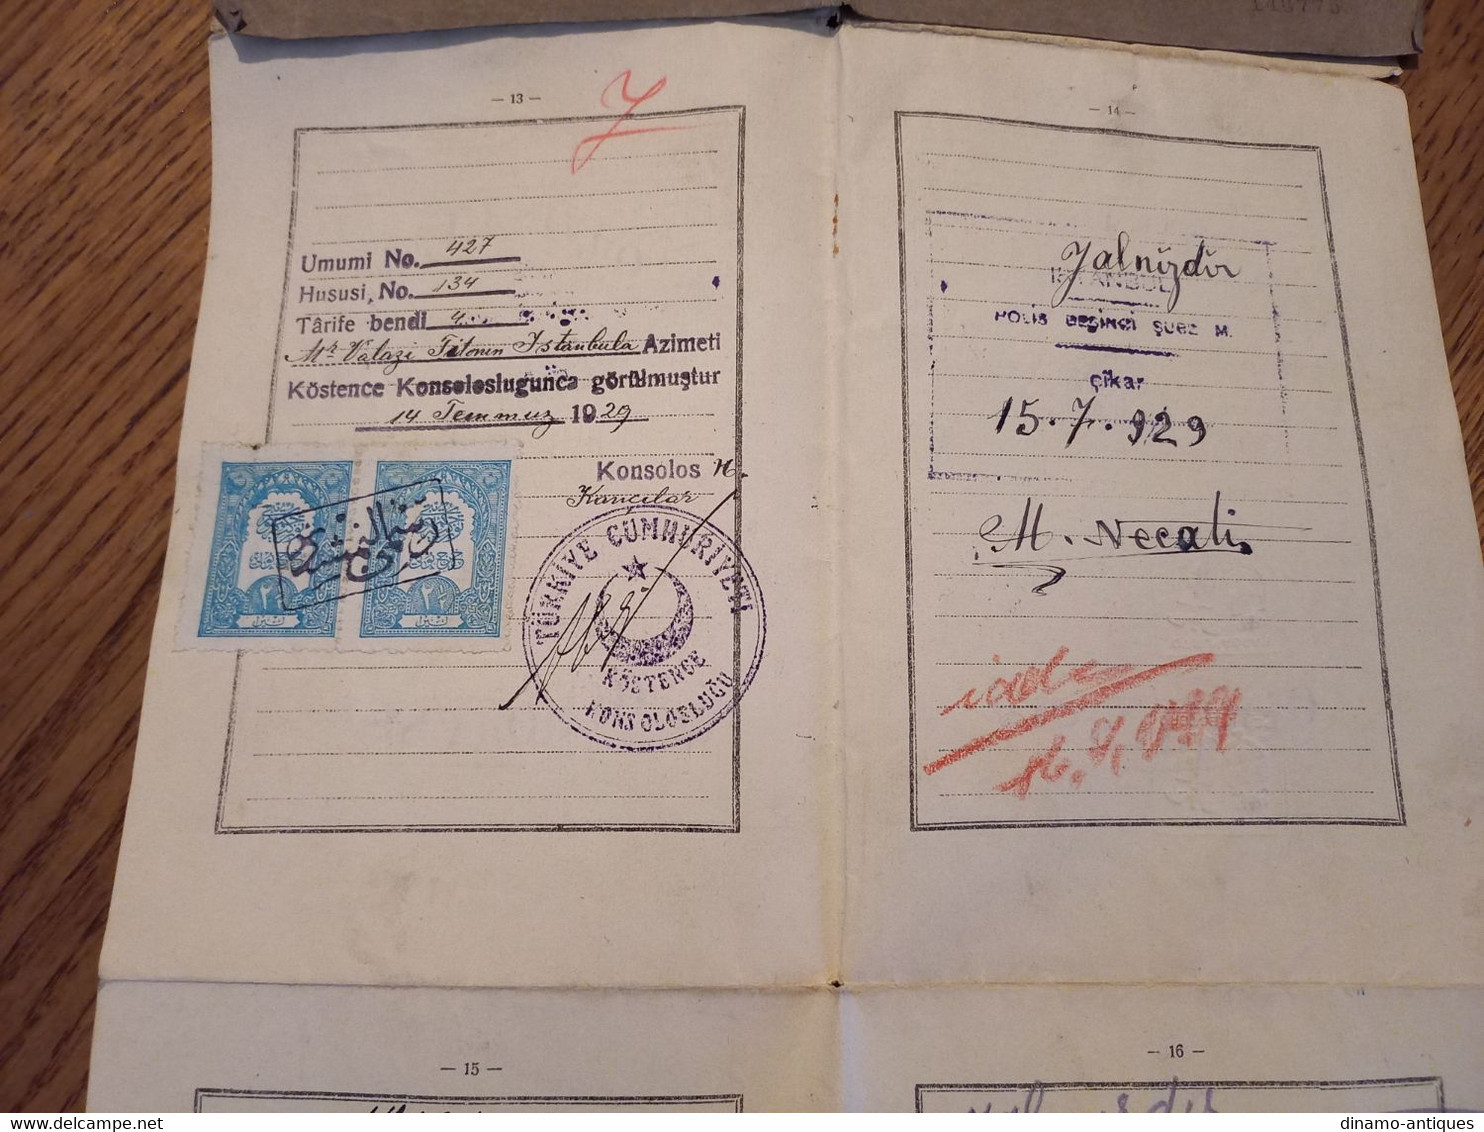 1929 Italy passport passeport issued in Constantinople Turkey with travel to Romania Bulgaria rare type revenues fiscal